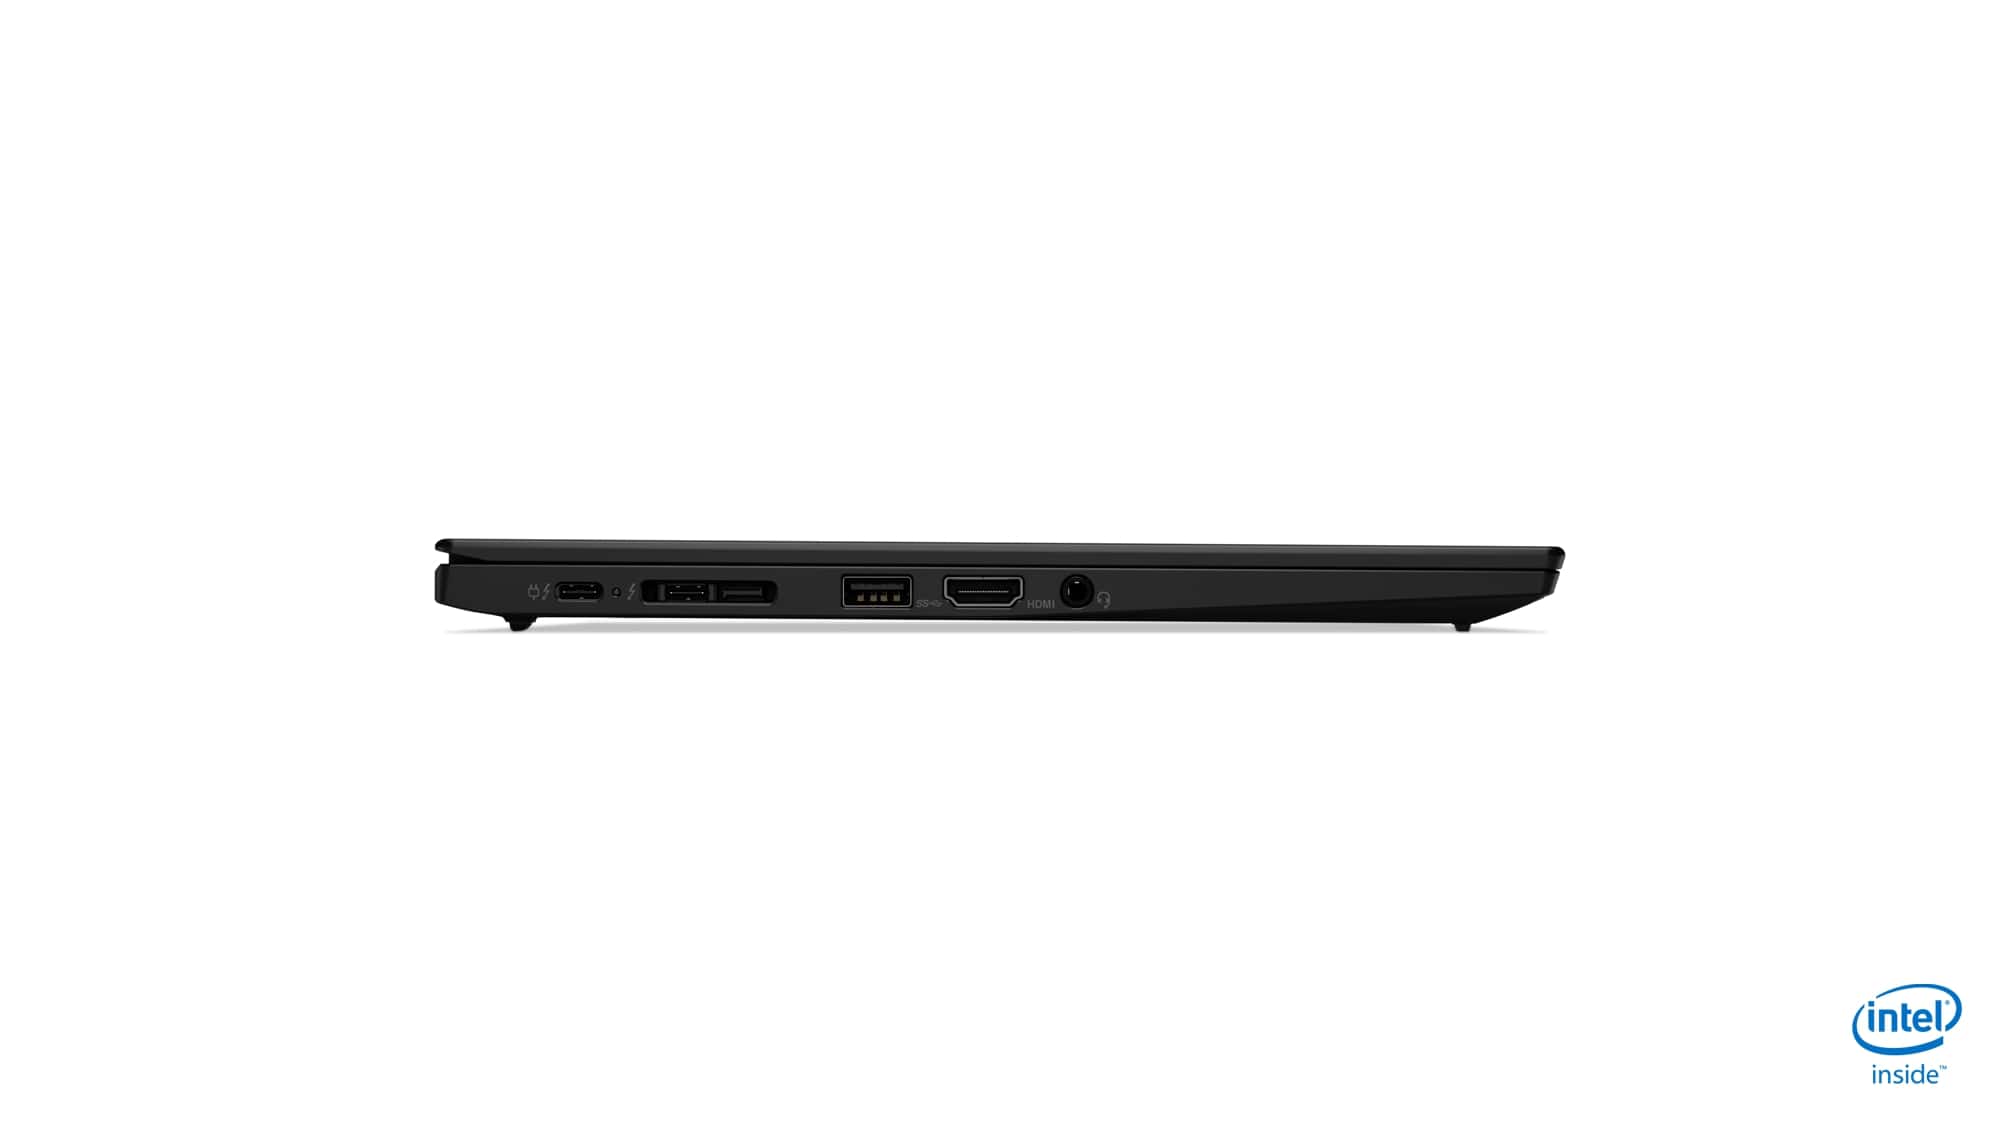 lenovo updated thinkpad x1 carbon yoga ces 2019 10 tour right